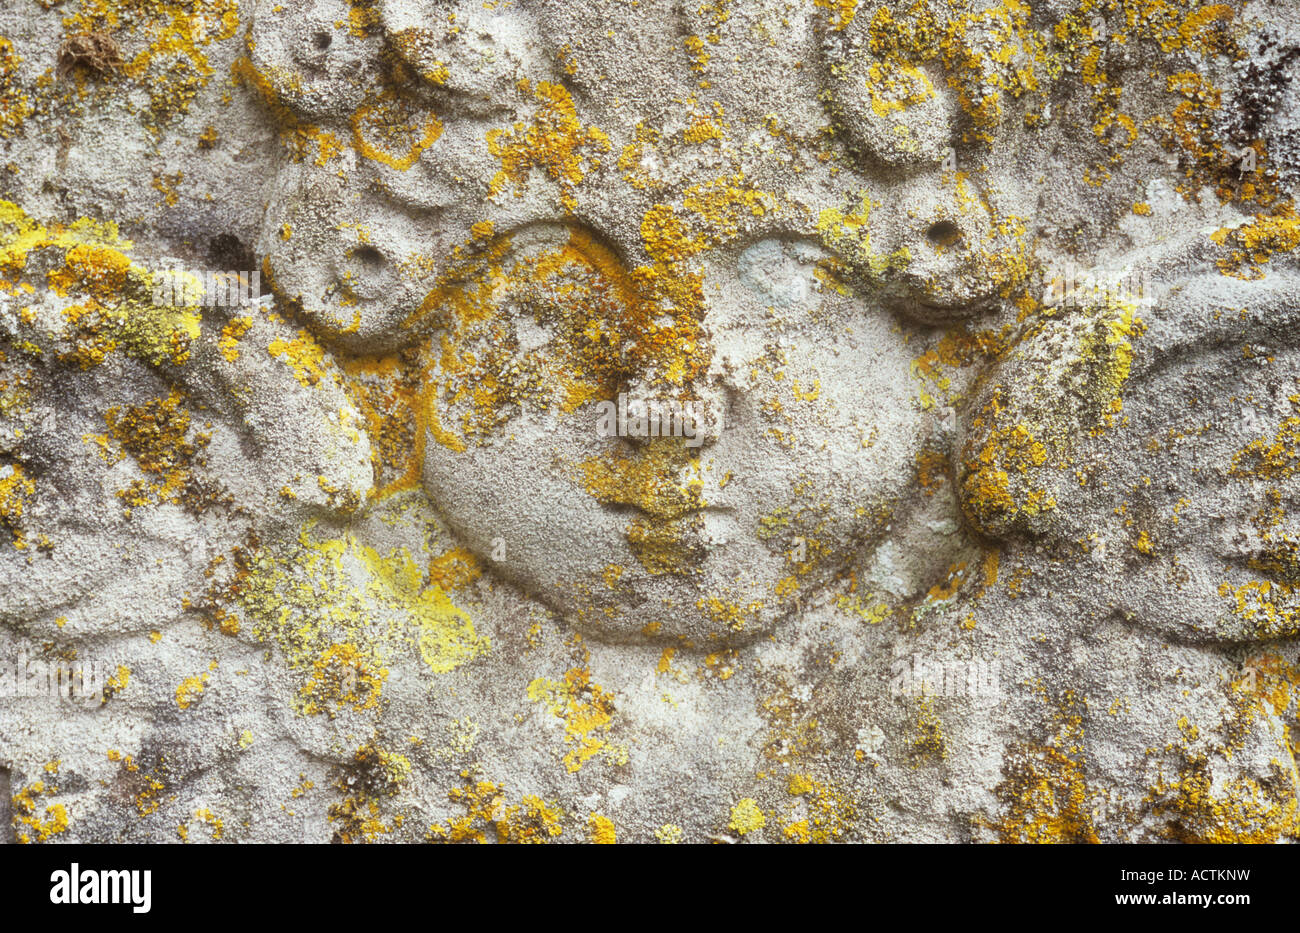 Detail of lichen-covered gravestone dated 1839 with head of cherubic angel with curly locks of hair Stock Photo